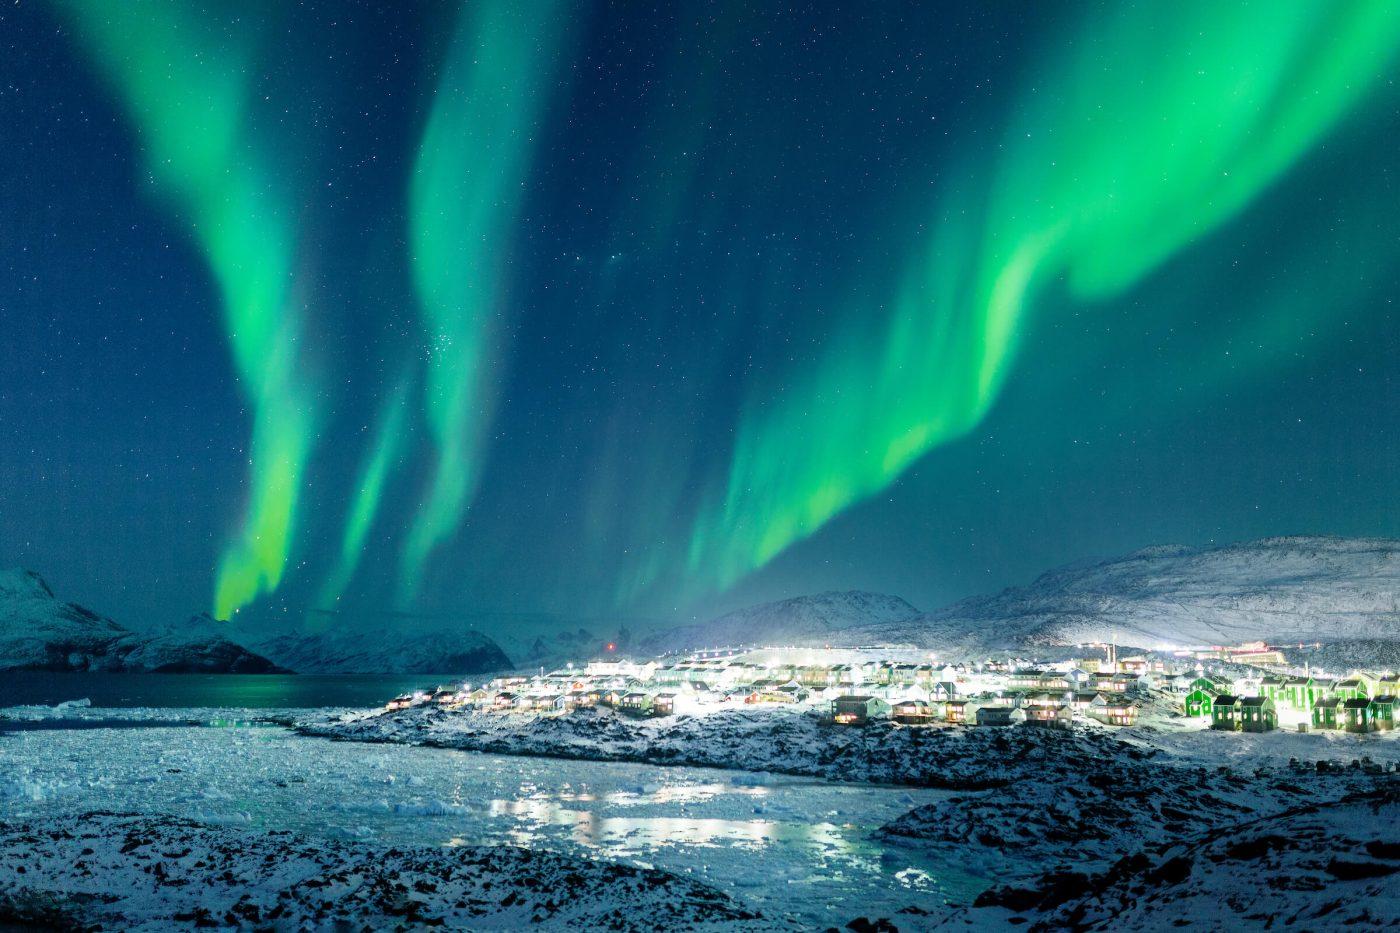 Northern Lights over the city lights of Nussuaq, Nuuk in Greenland. Photo by Rebecca Gustafsson